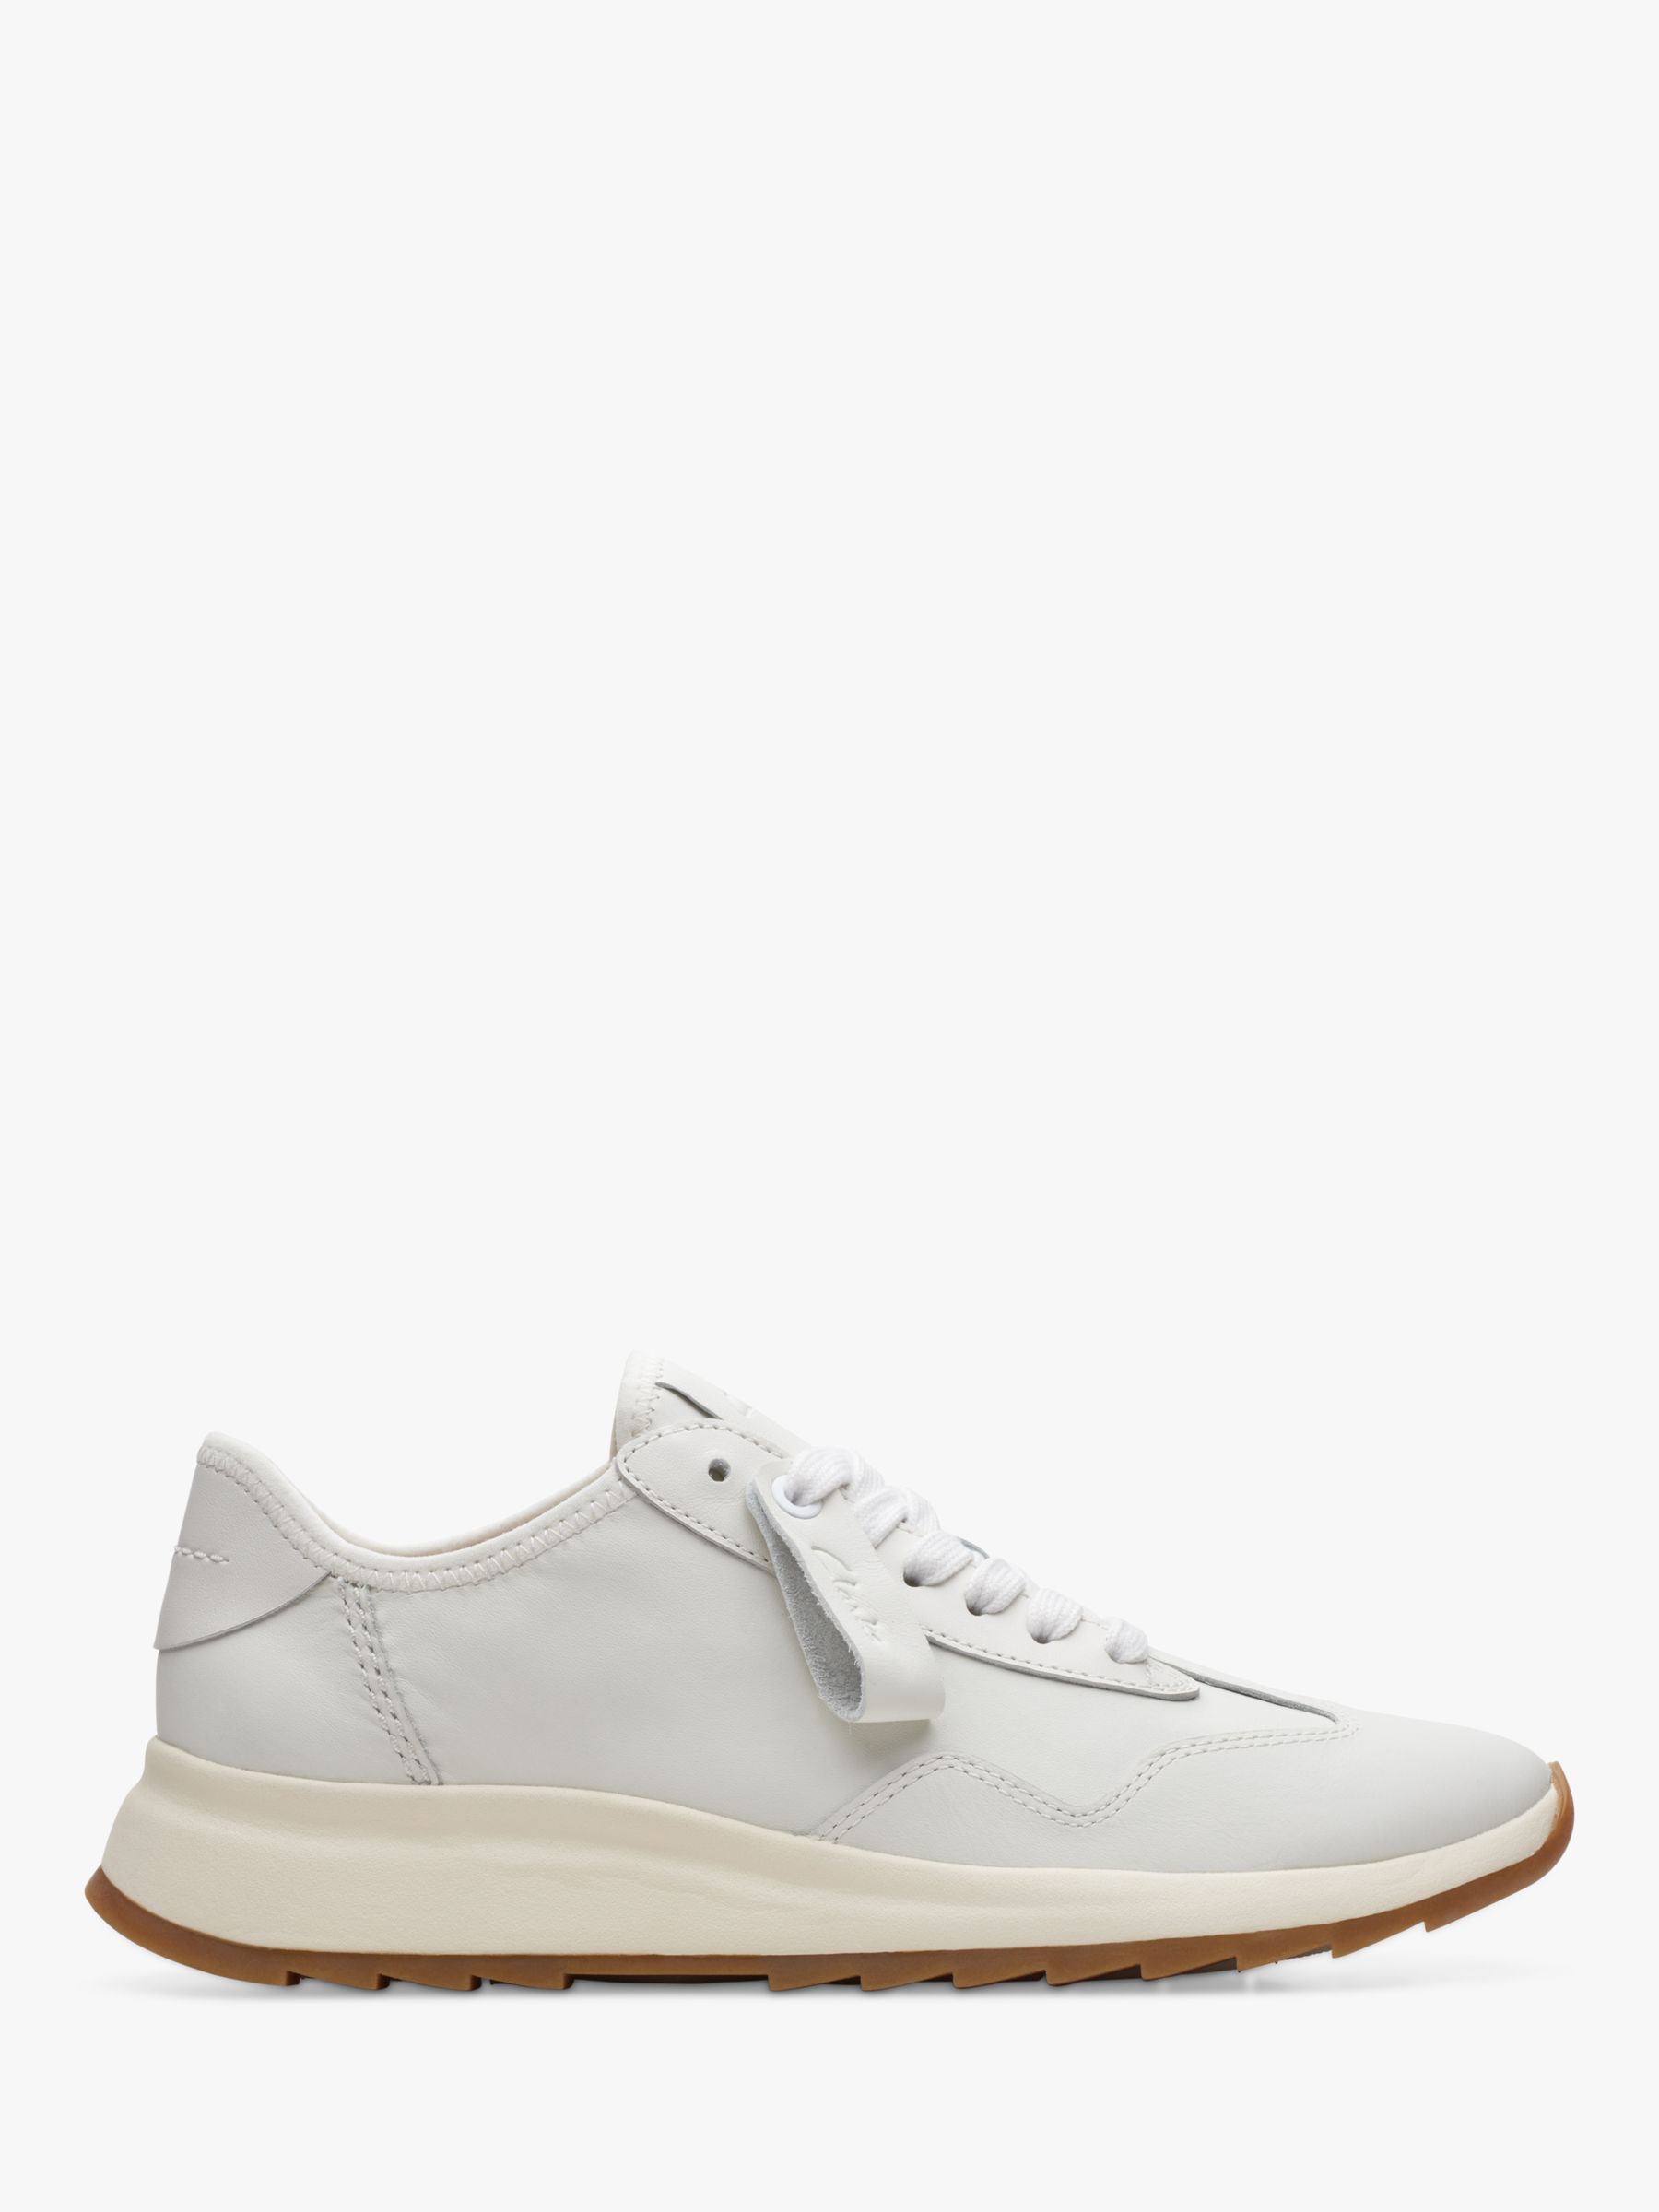 Clarks DashLite Lo Leather Trainers, White at John Lewis & Partners